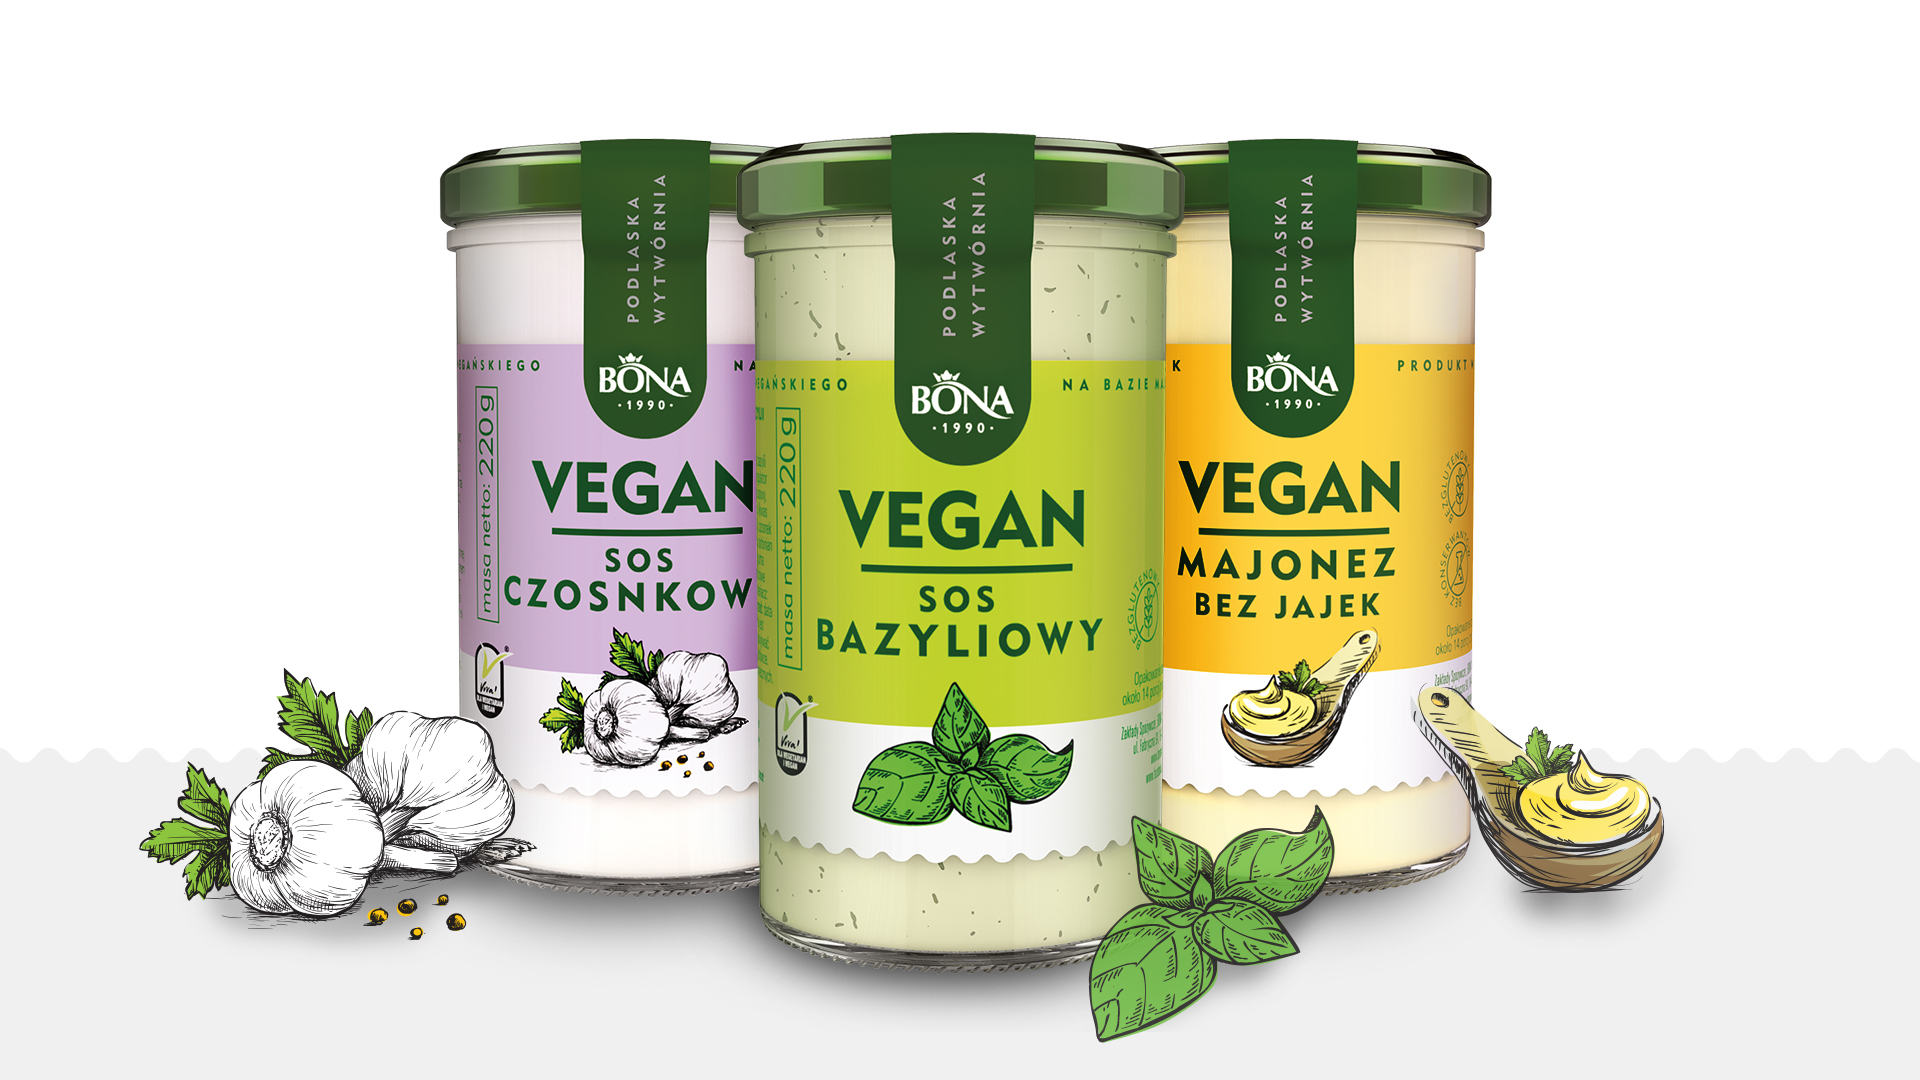 Brandy Design Creates Packaging Design For Bona: Vegan For The Very First Time